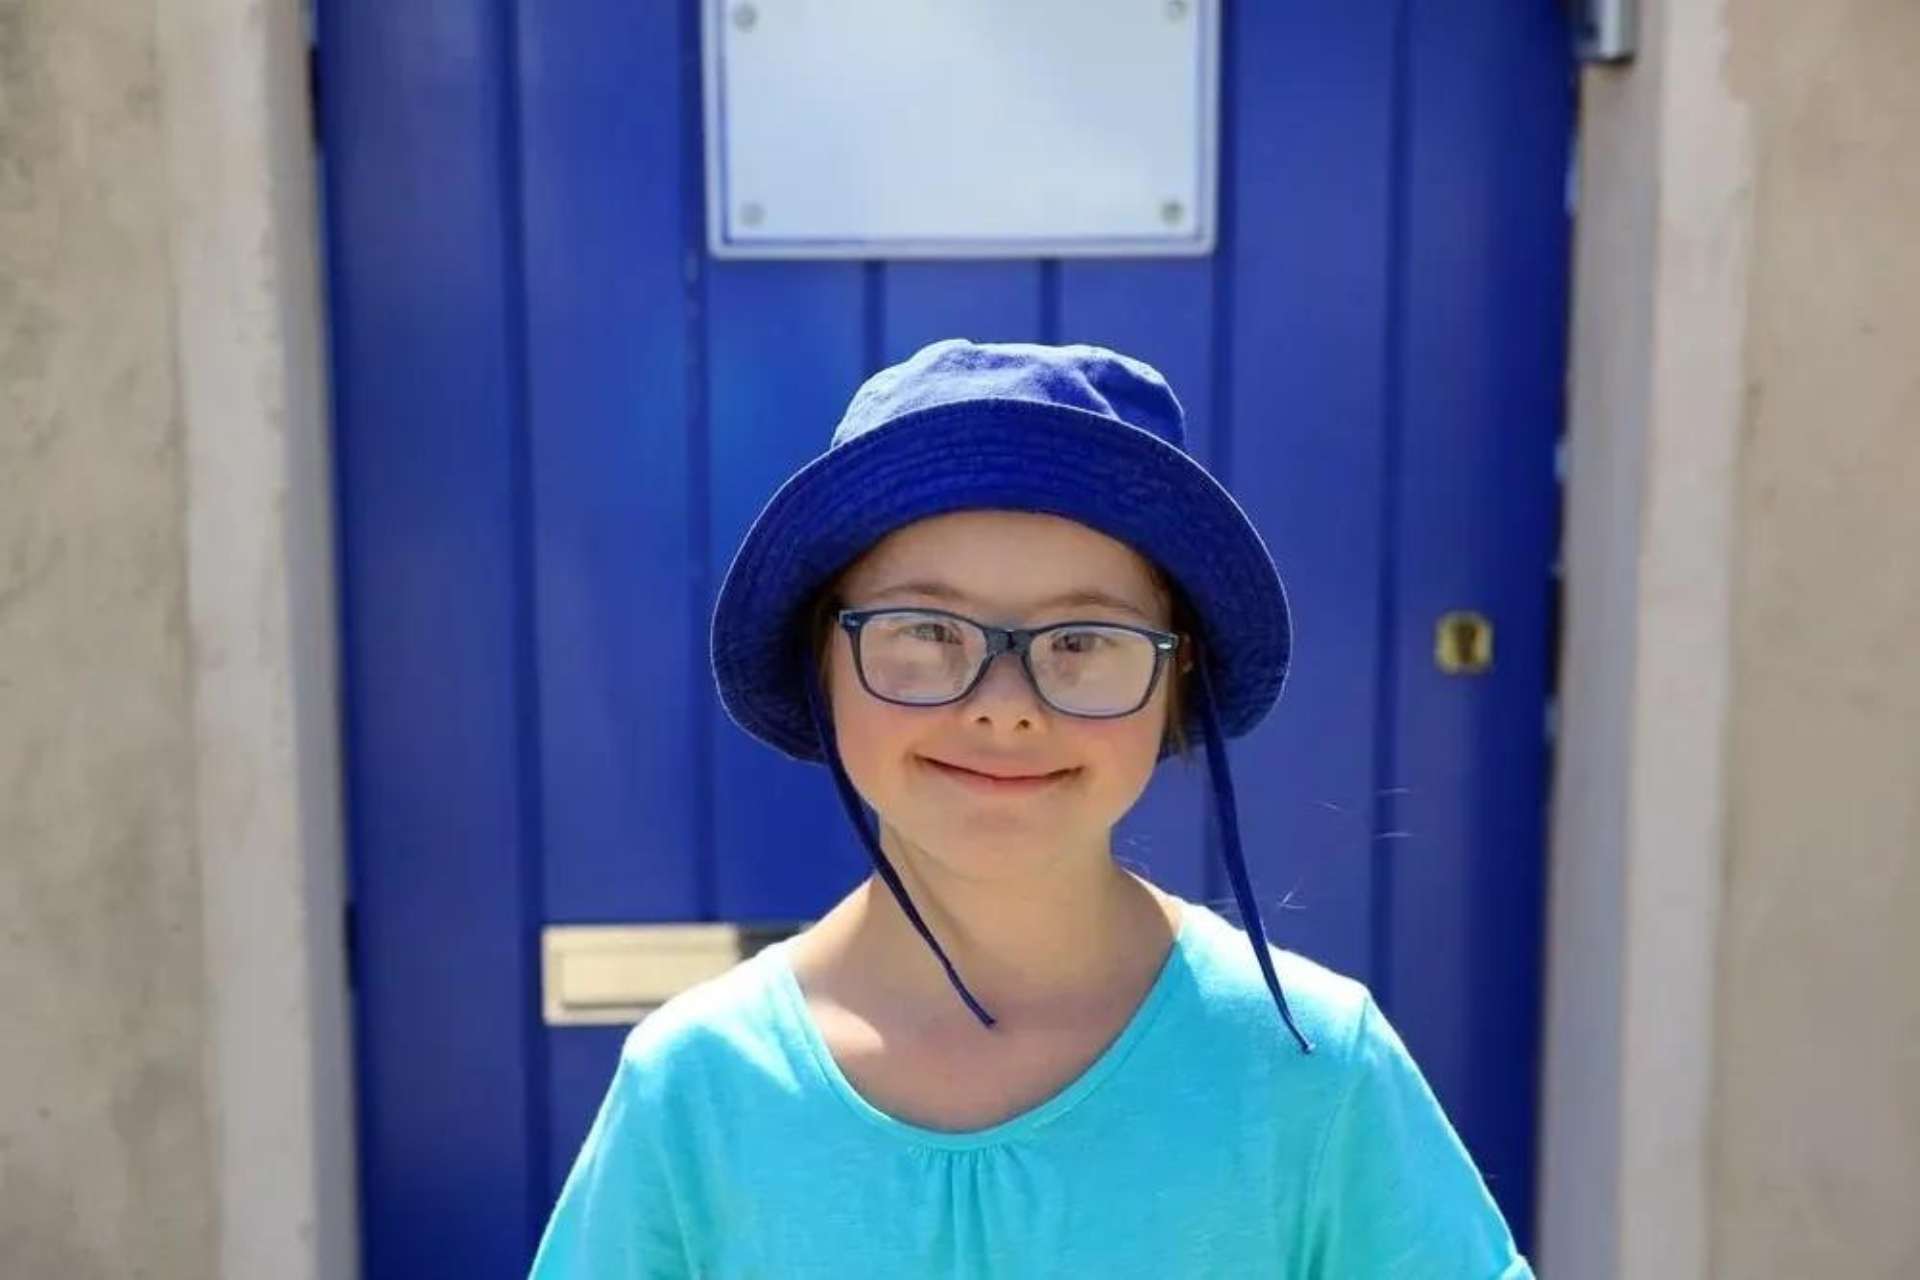 Girl smiling at the camera wearing a sun hat. She is standing on front of a blue door